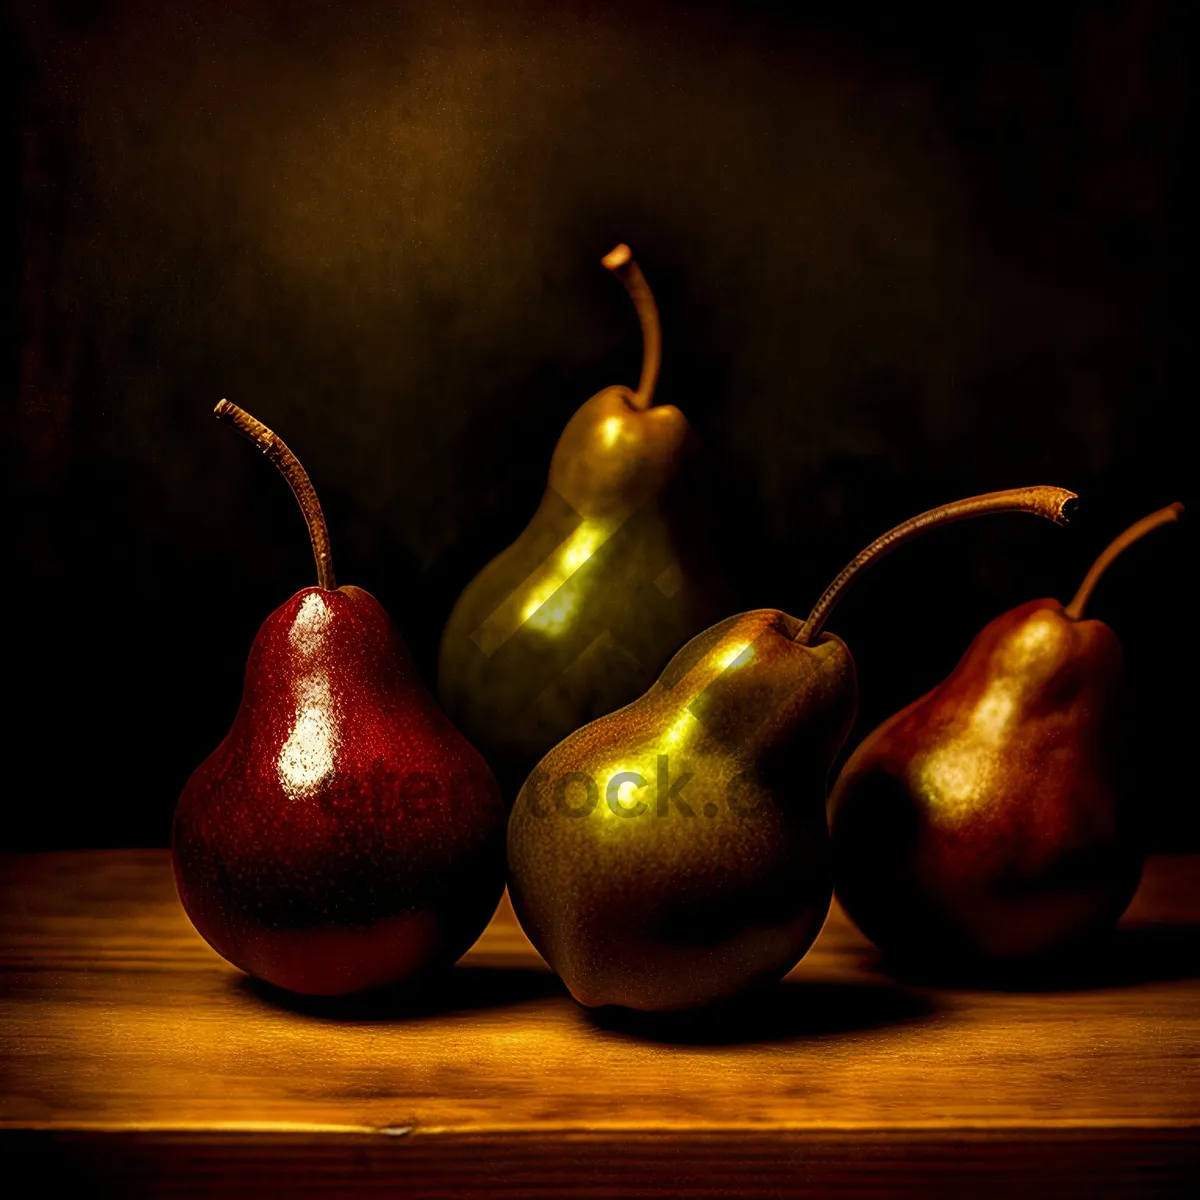 Picture of Fresh and Juicy Pear - Healthy and Delicious Fruit